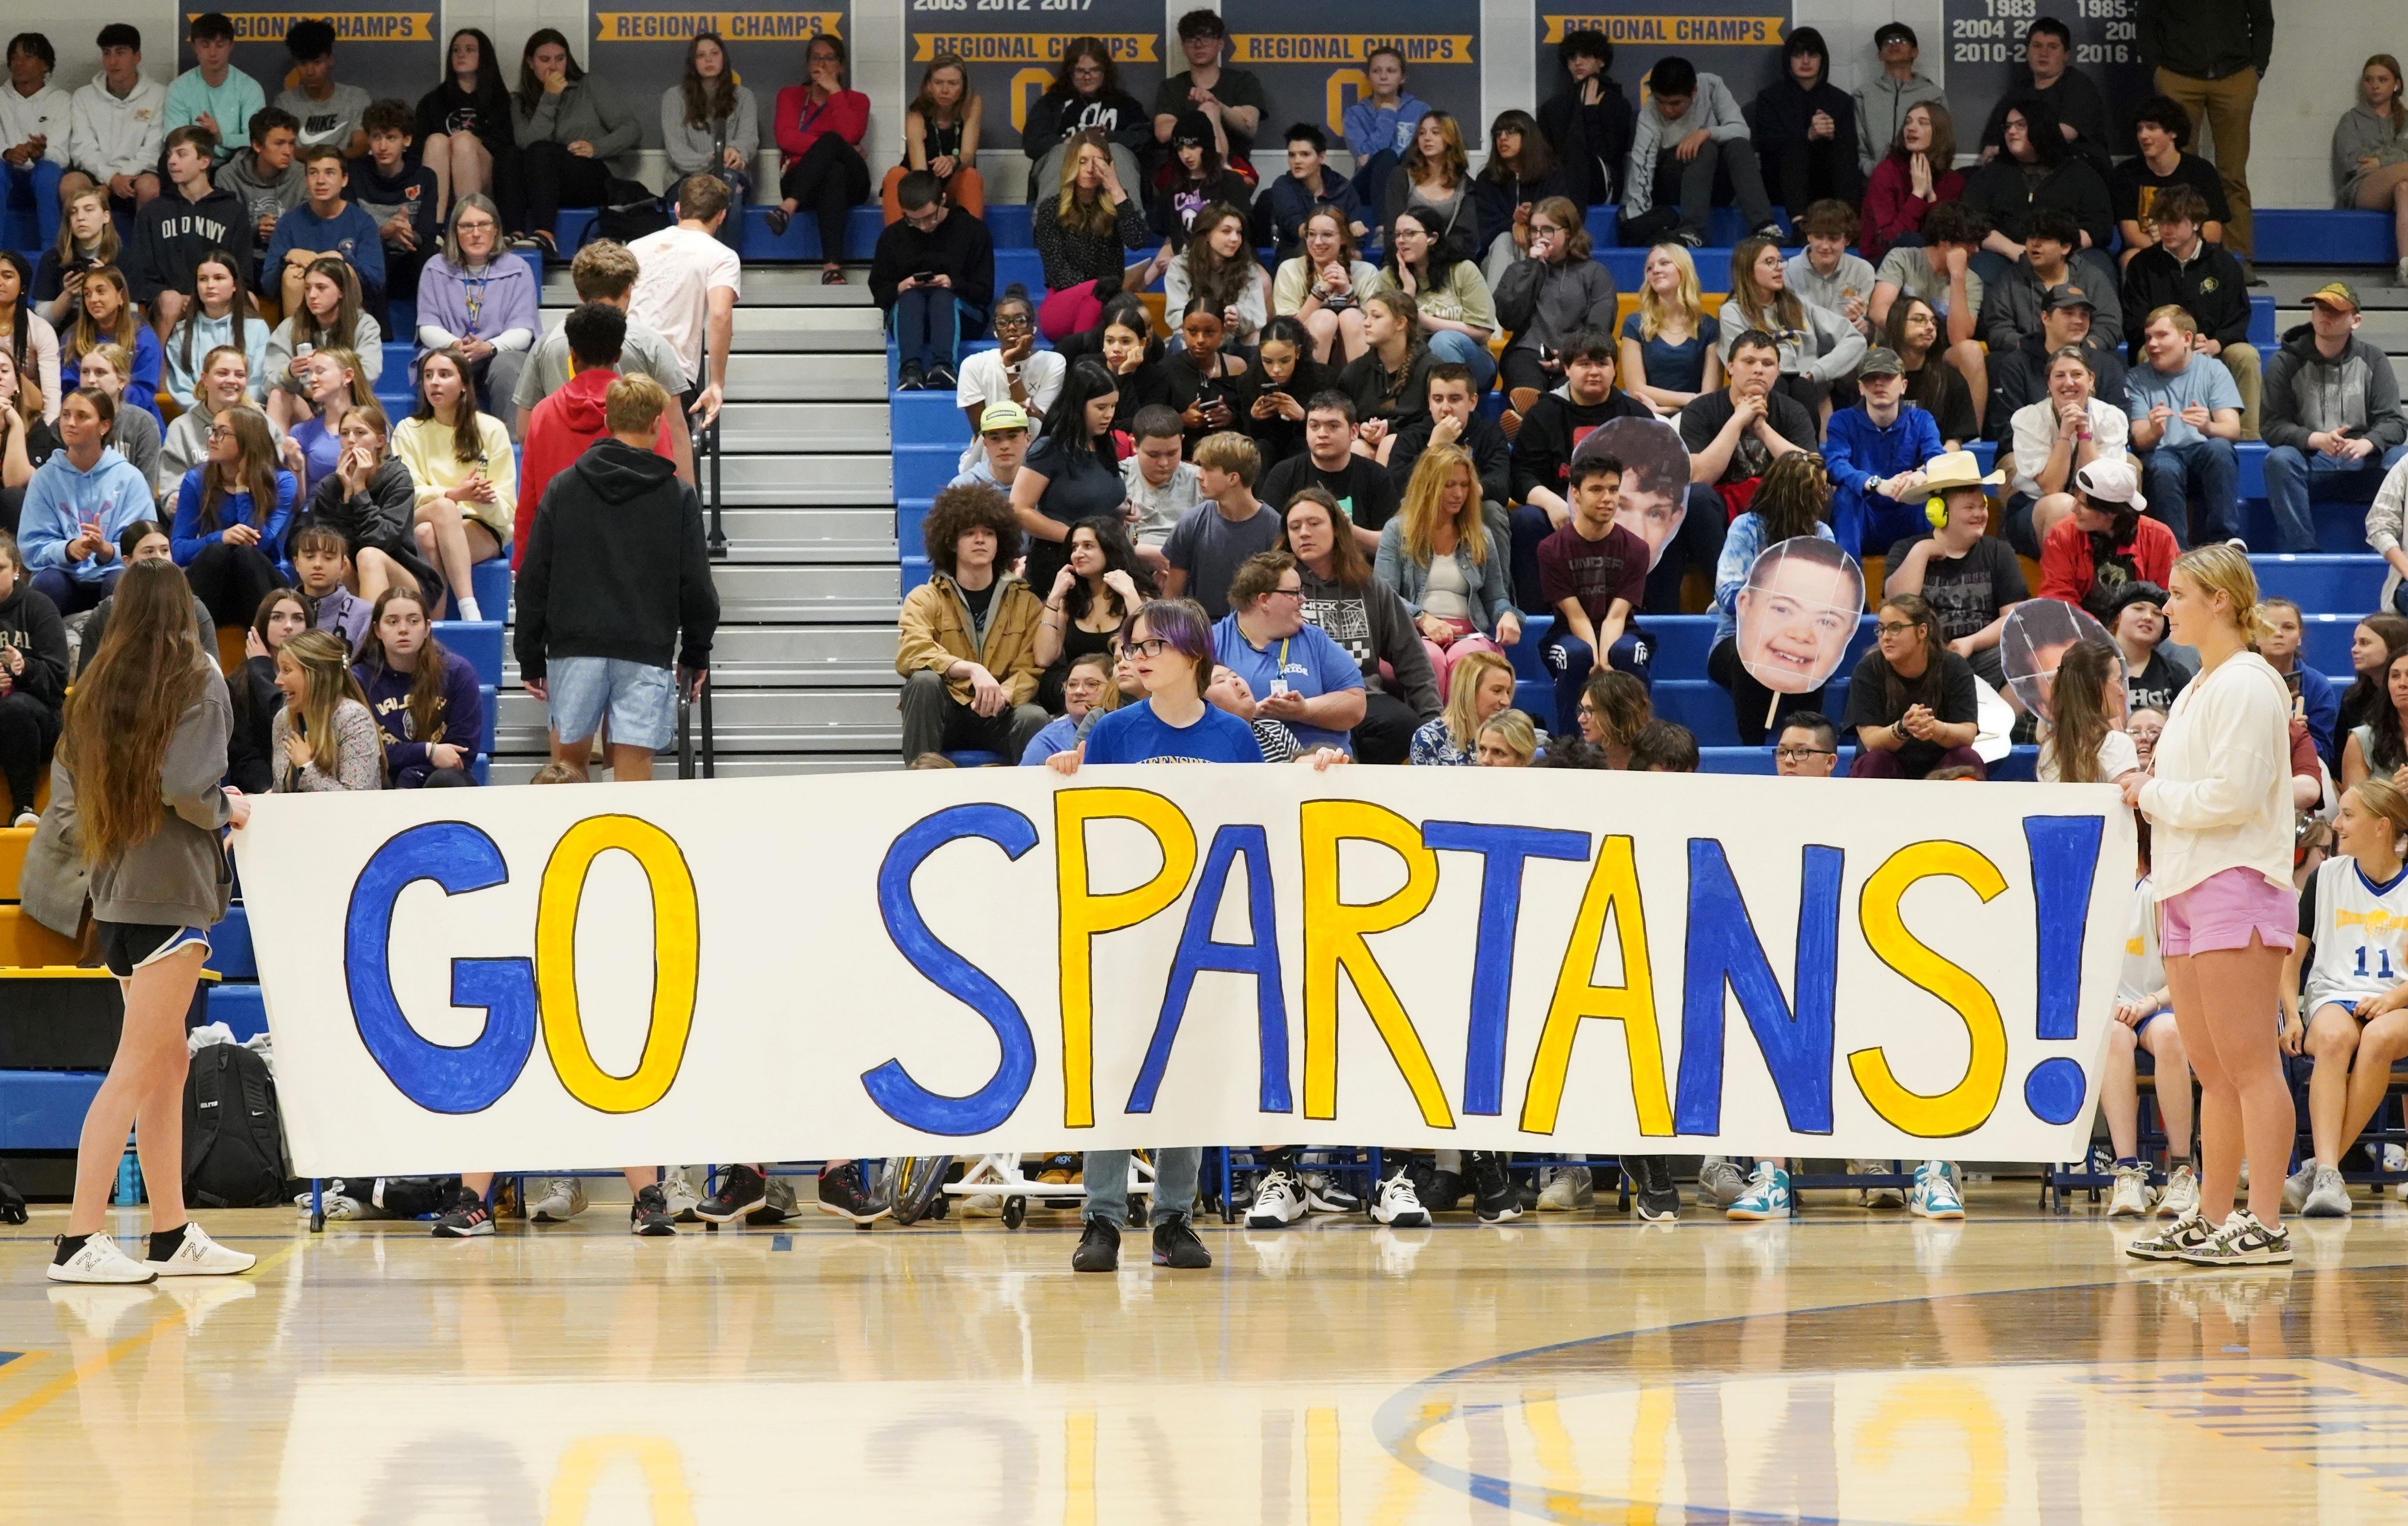 Students hold up sign at basketball game.